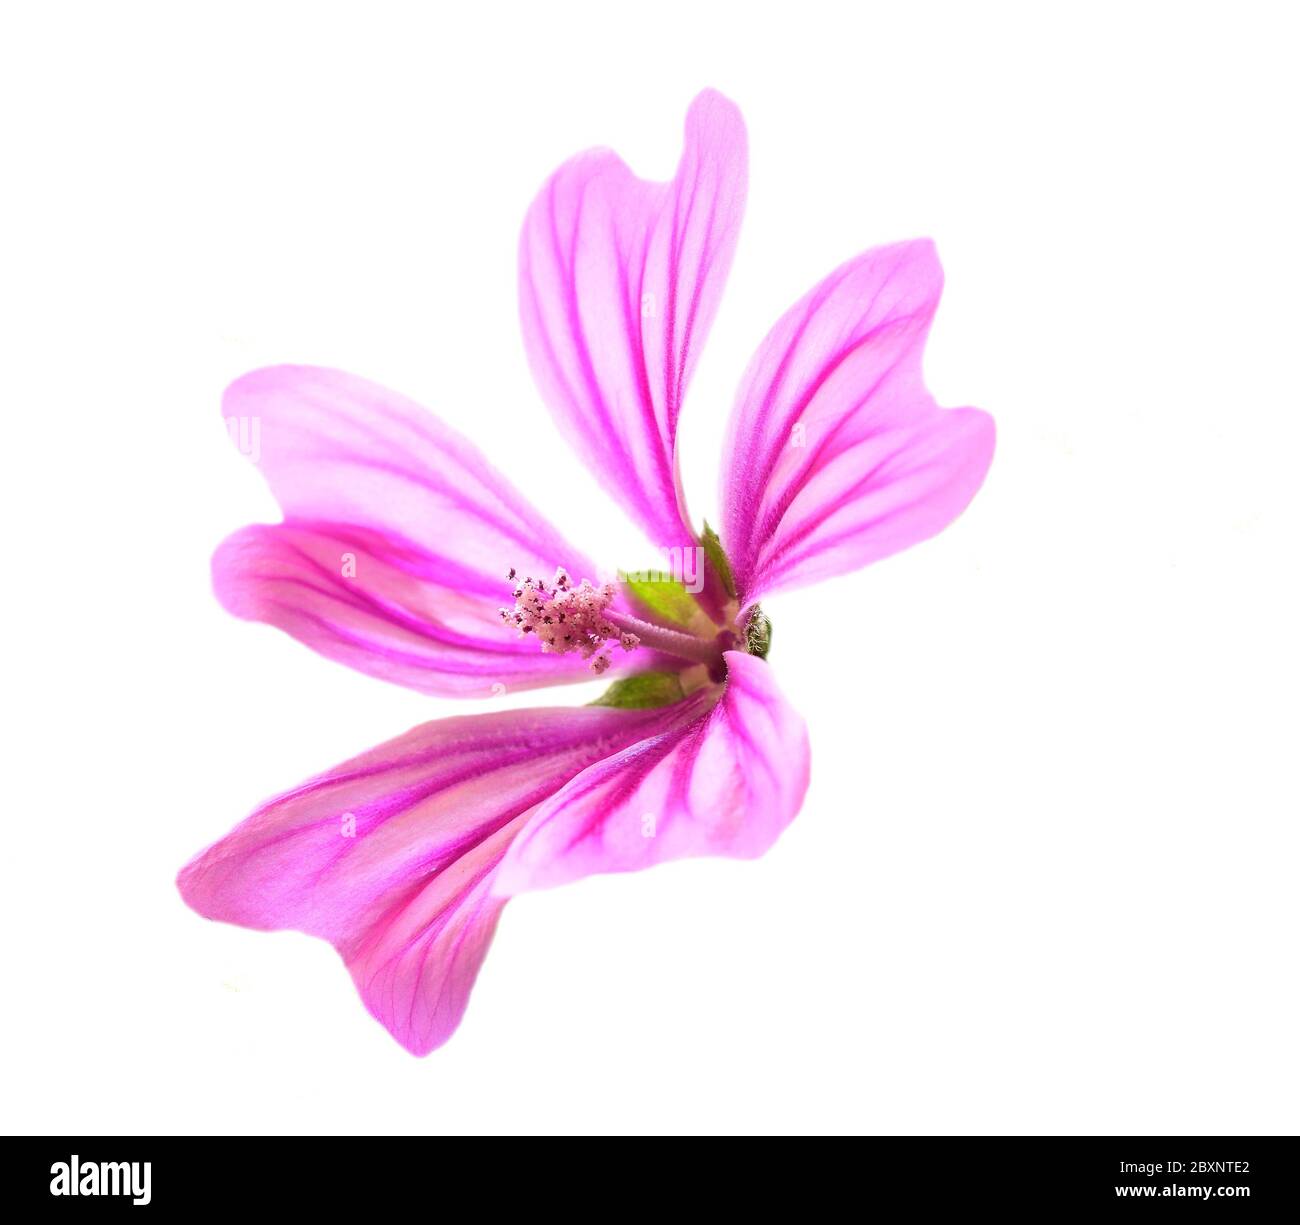 Common Mallow flower - malva sylvestris. Medicinal plant. Back lit, high key with selective shallow focus for artistic effect. Isolated on white. Stock Photo